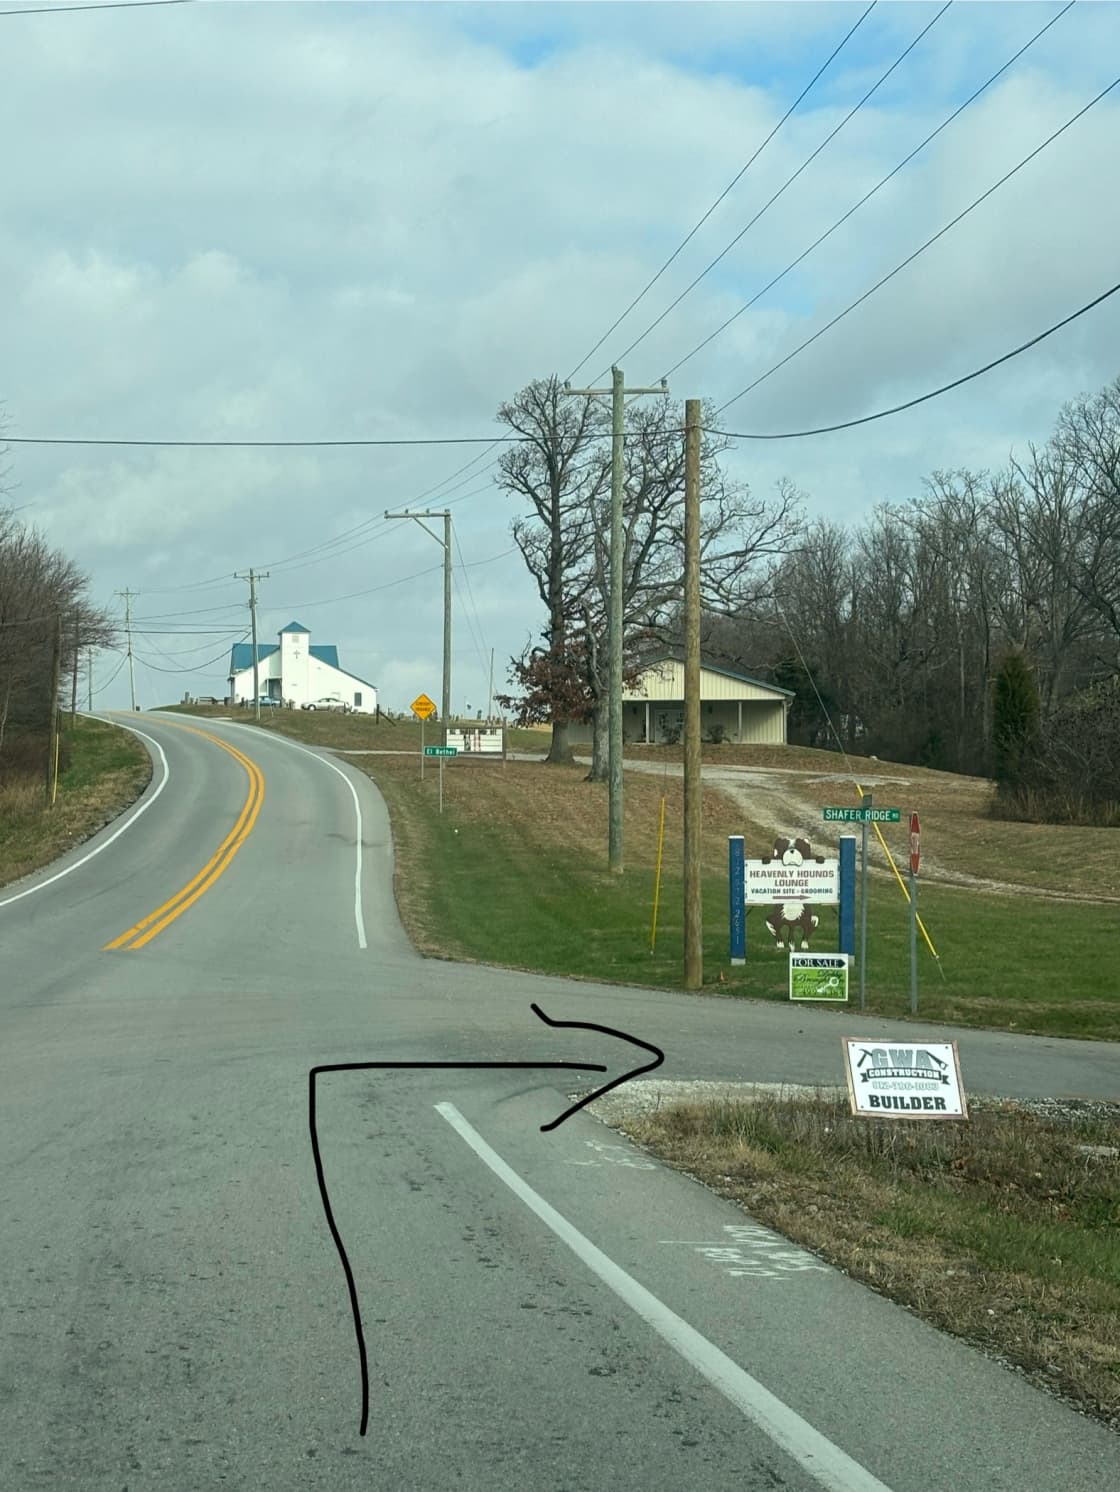 At Exit 92, Go a little over 2 miles north on 66 and turn right, right after the blue buildings. The property is about one mile down on the right.